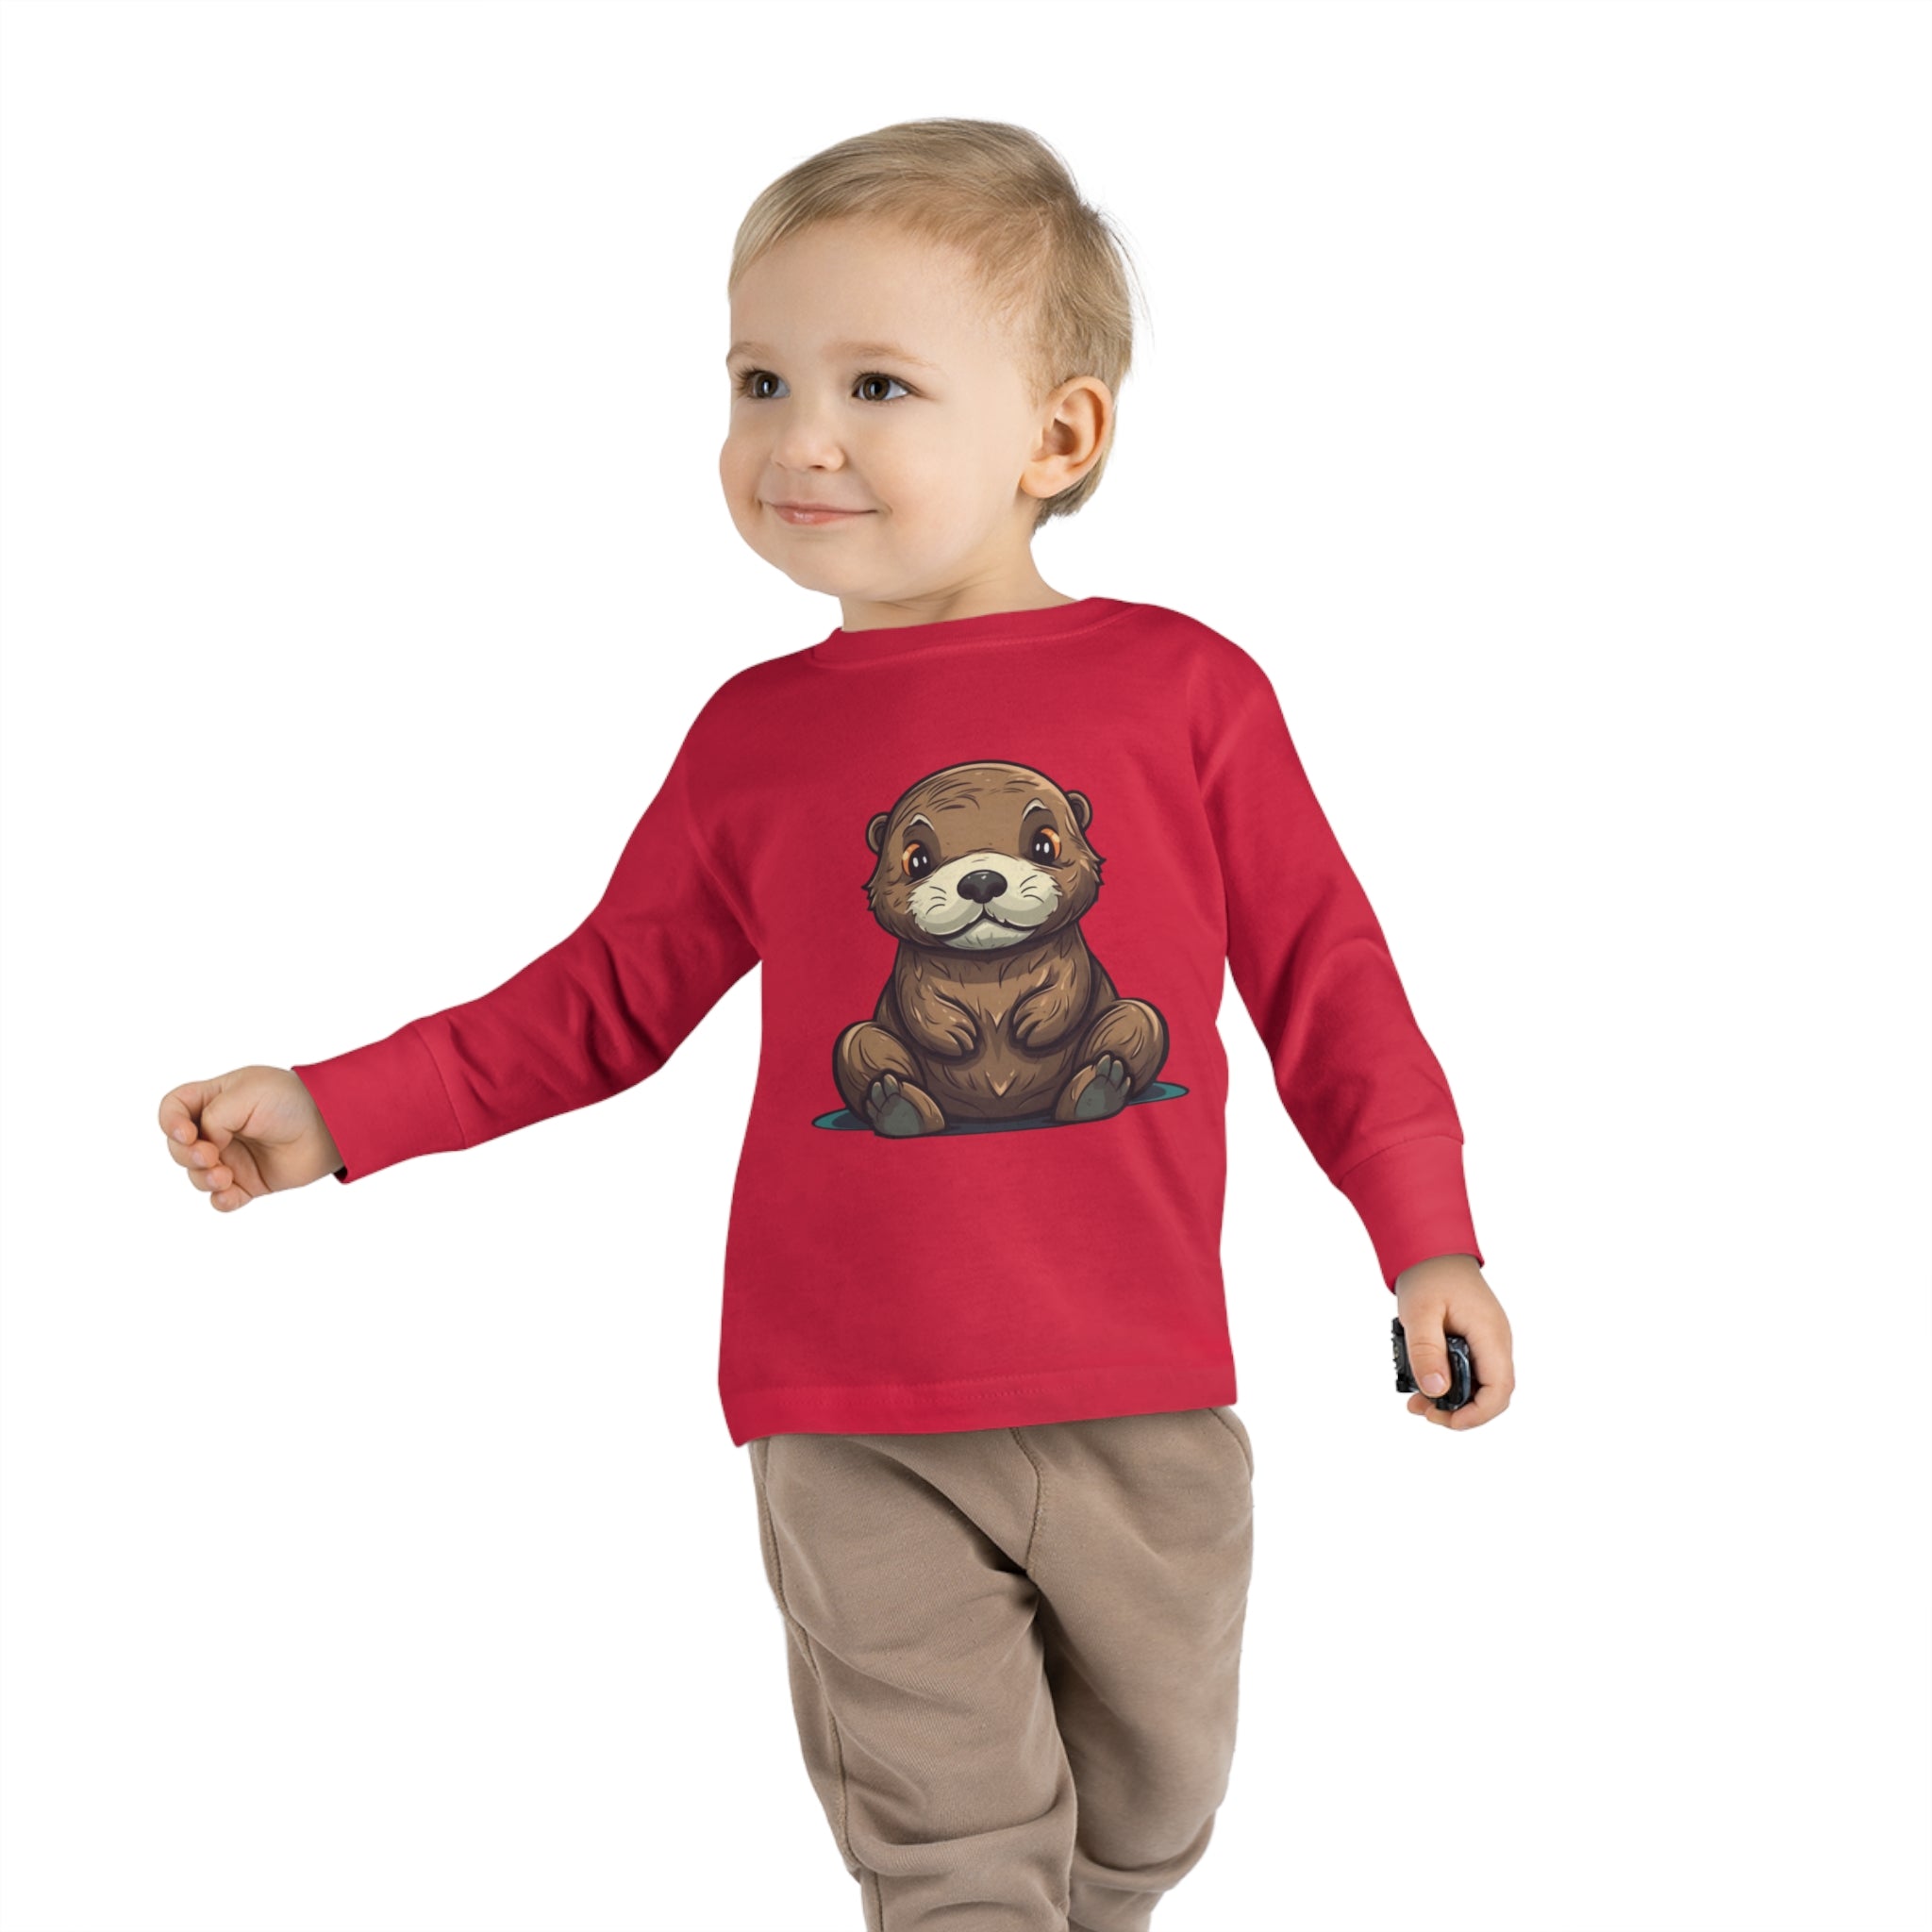 Toddler Long Sleeve Tee - Sea Otter Pup